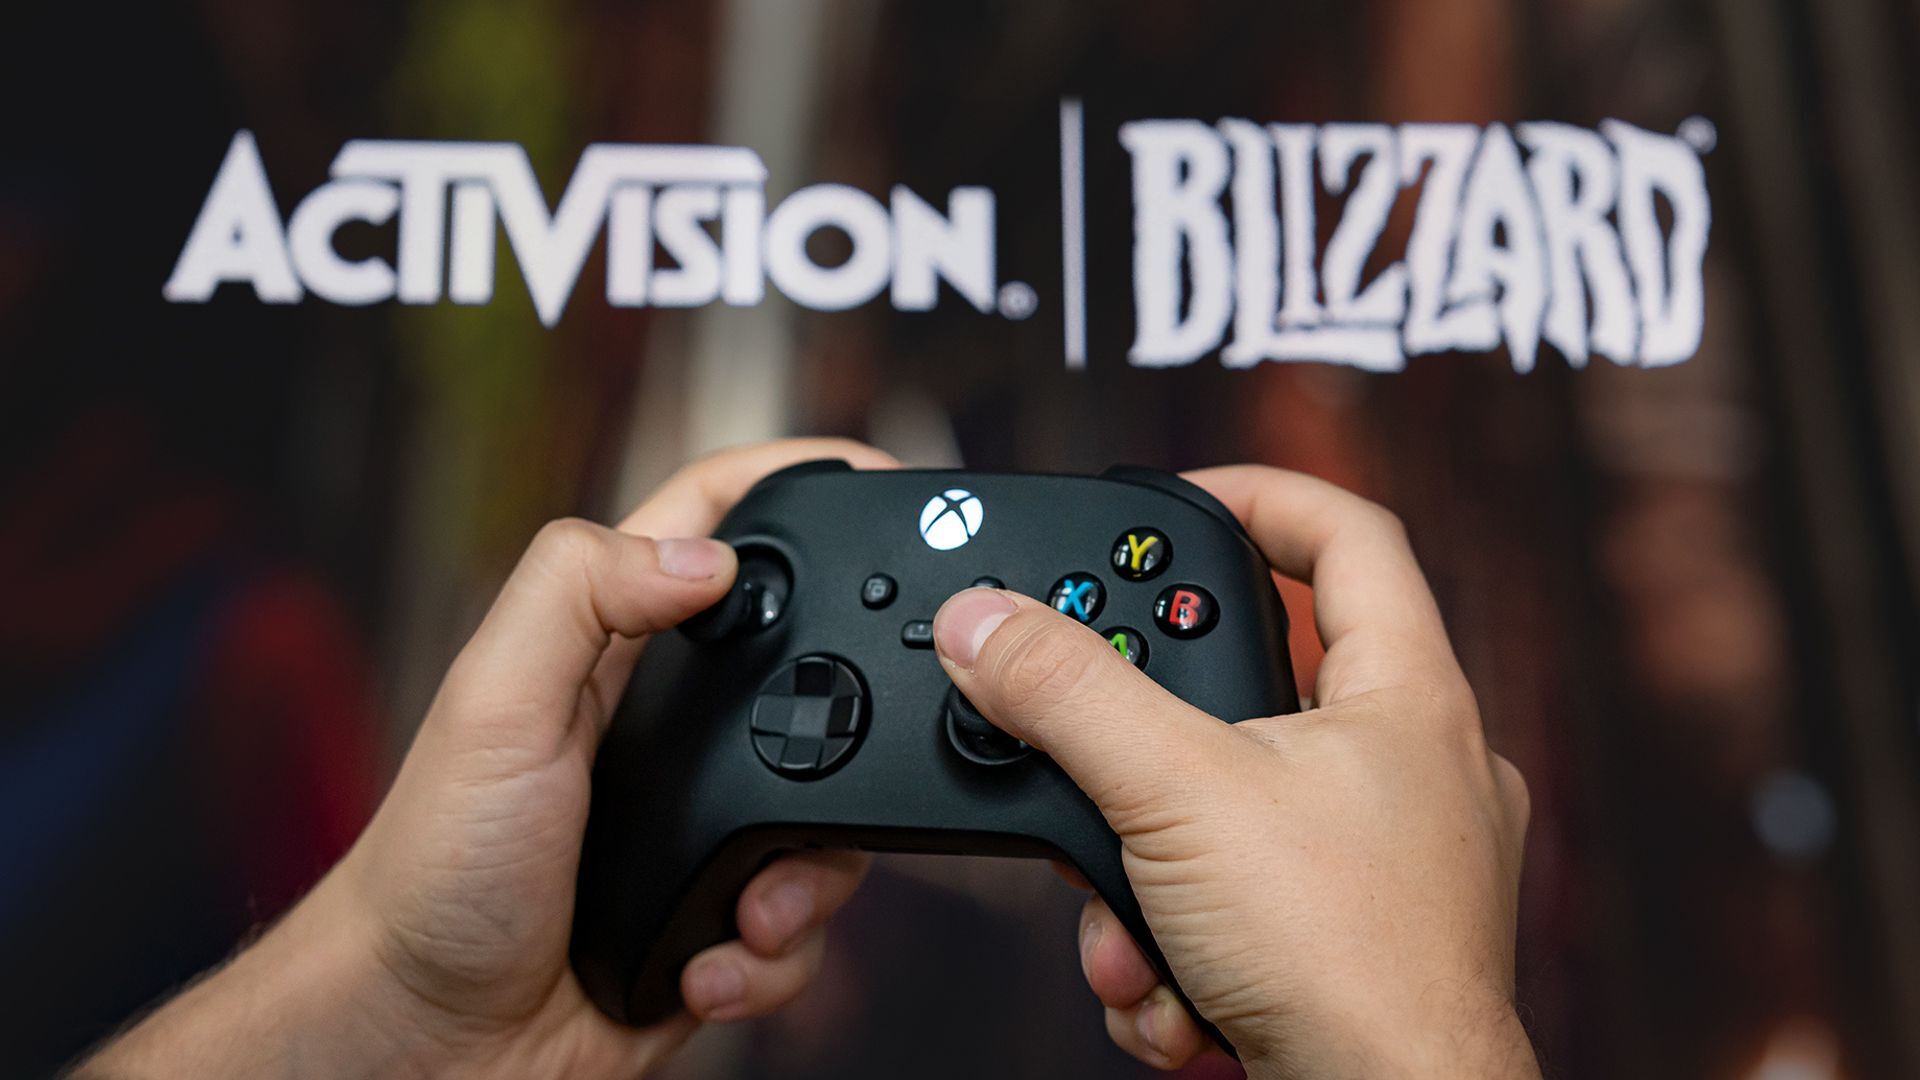 EU regulators green lit the hotly-contested  billion Microsoft-Activision Blizzard deal less than a month after the U.K. blocked it.